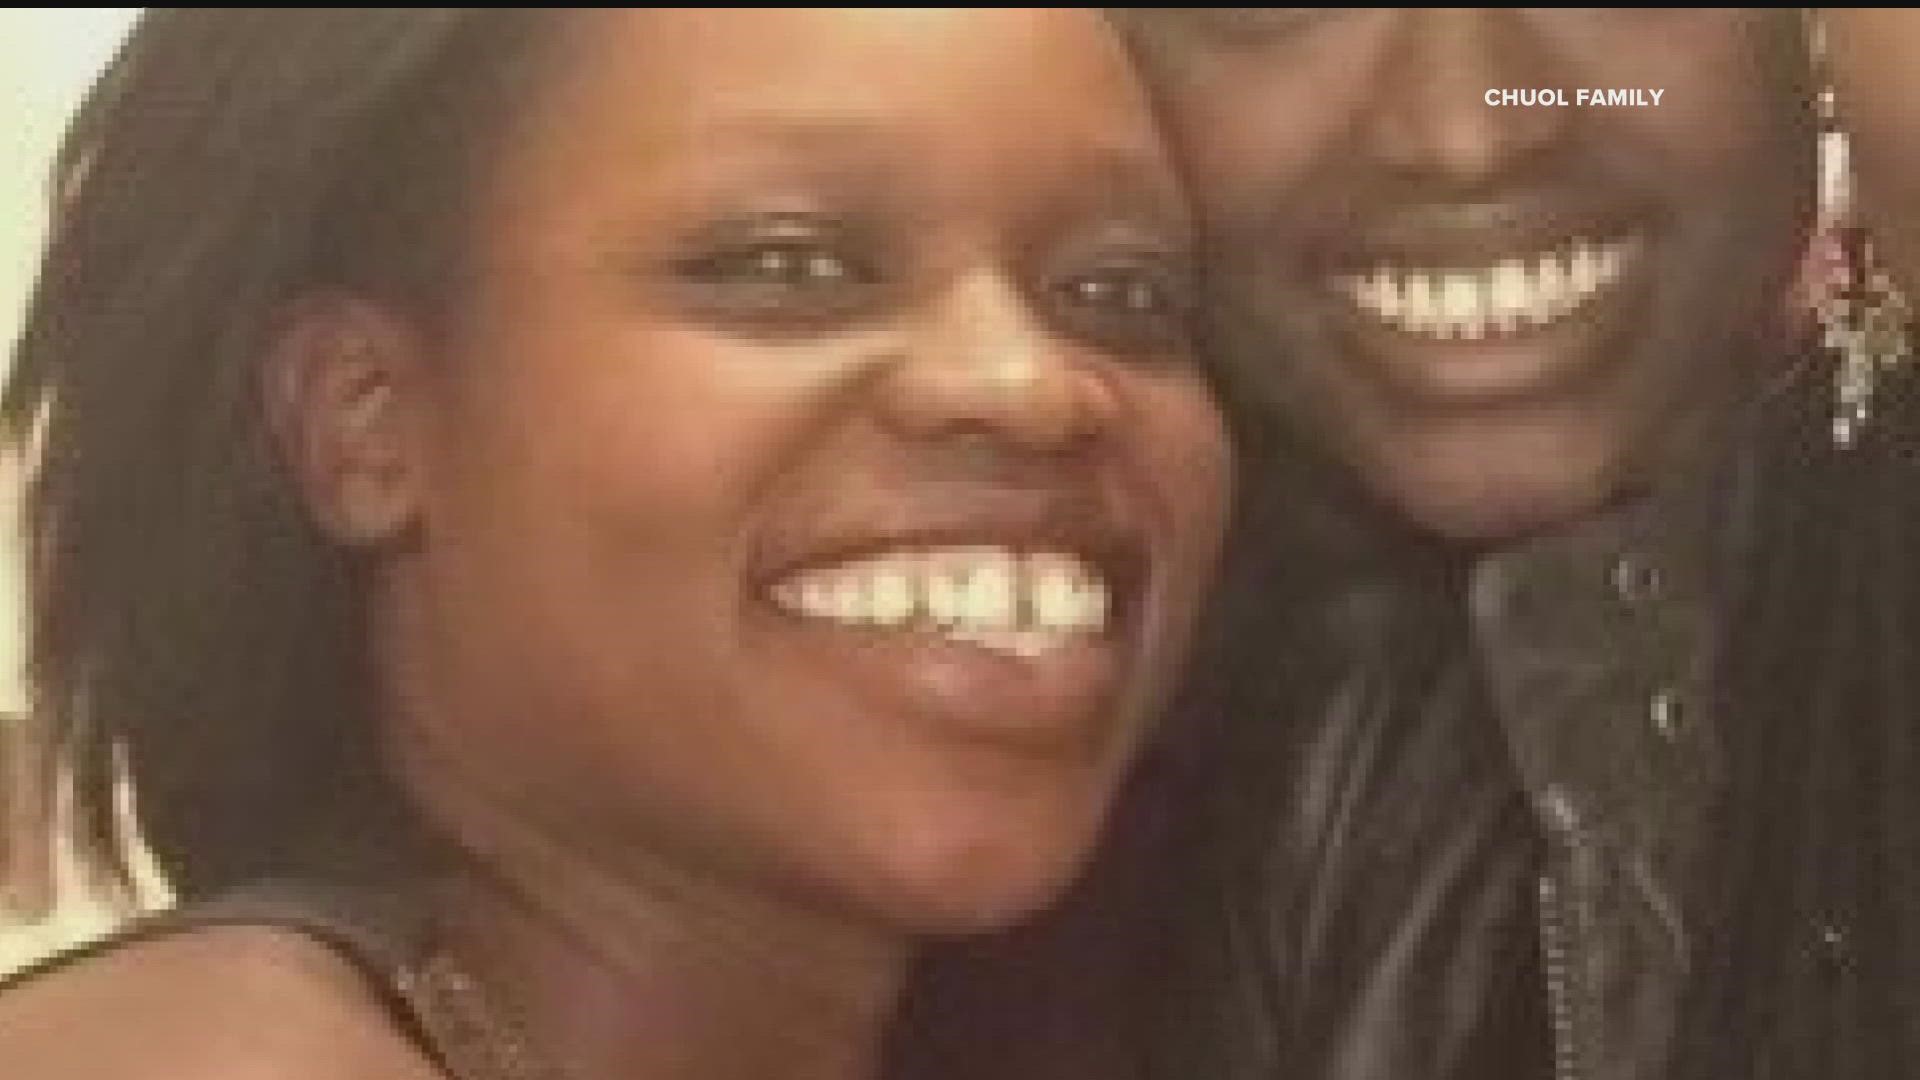 Officials working 30-year-old Nyawour Chuol's case say the search for the missing woman continues, and again asked for the public's help locating her.